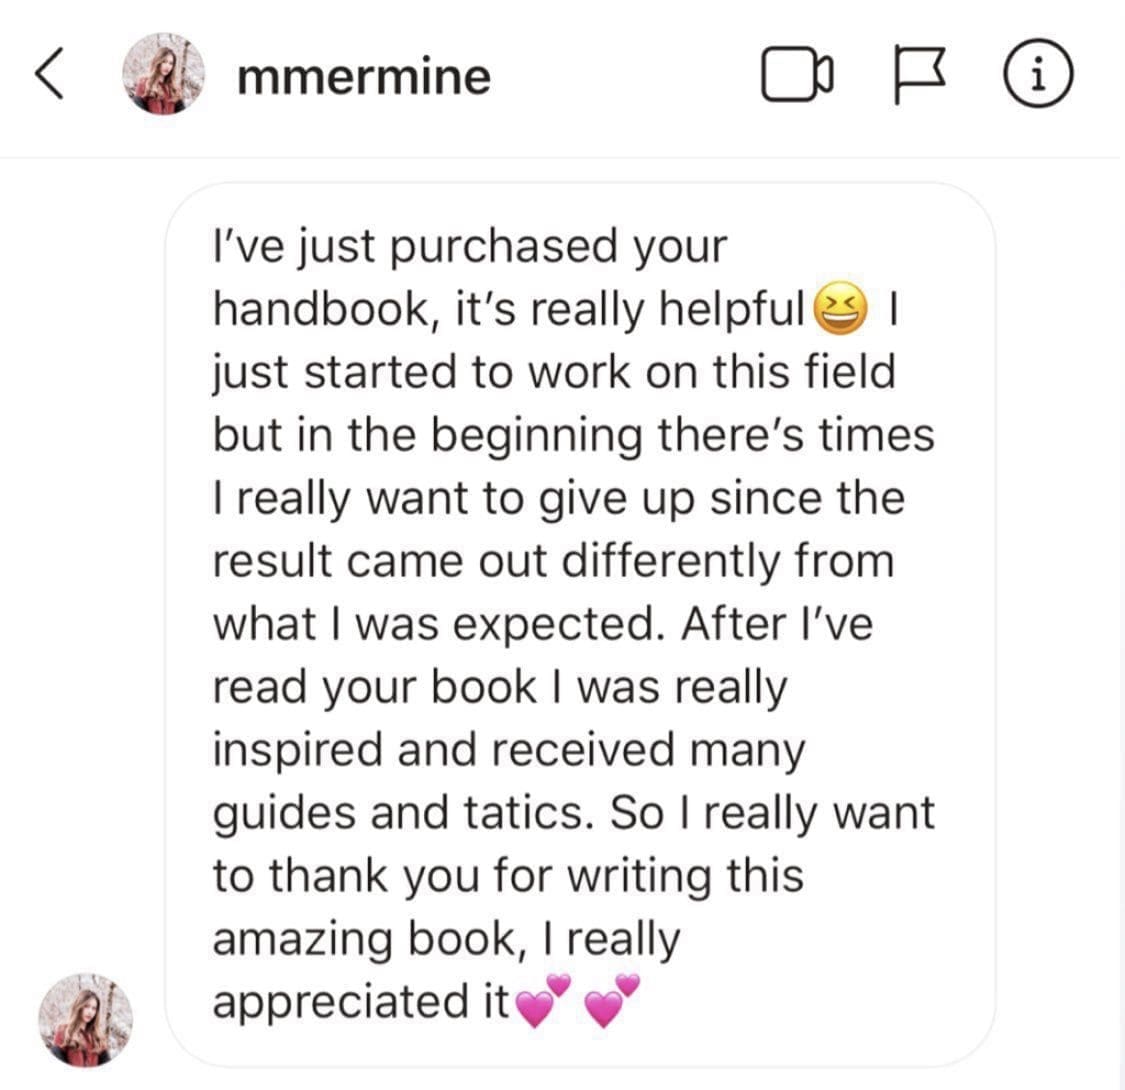 Mmermine messaged after reading the travel influencer handbook, saying how awesome it is!